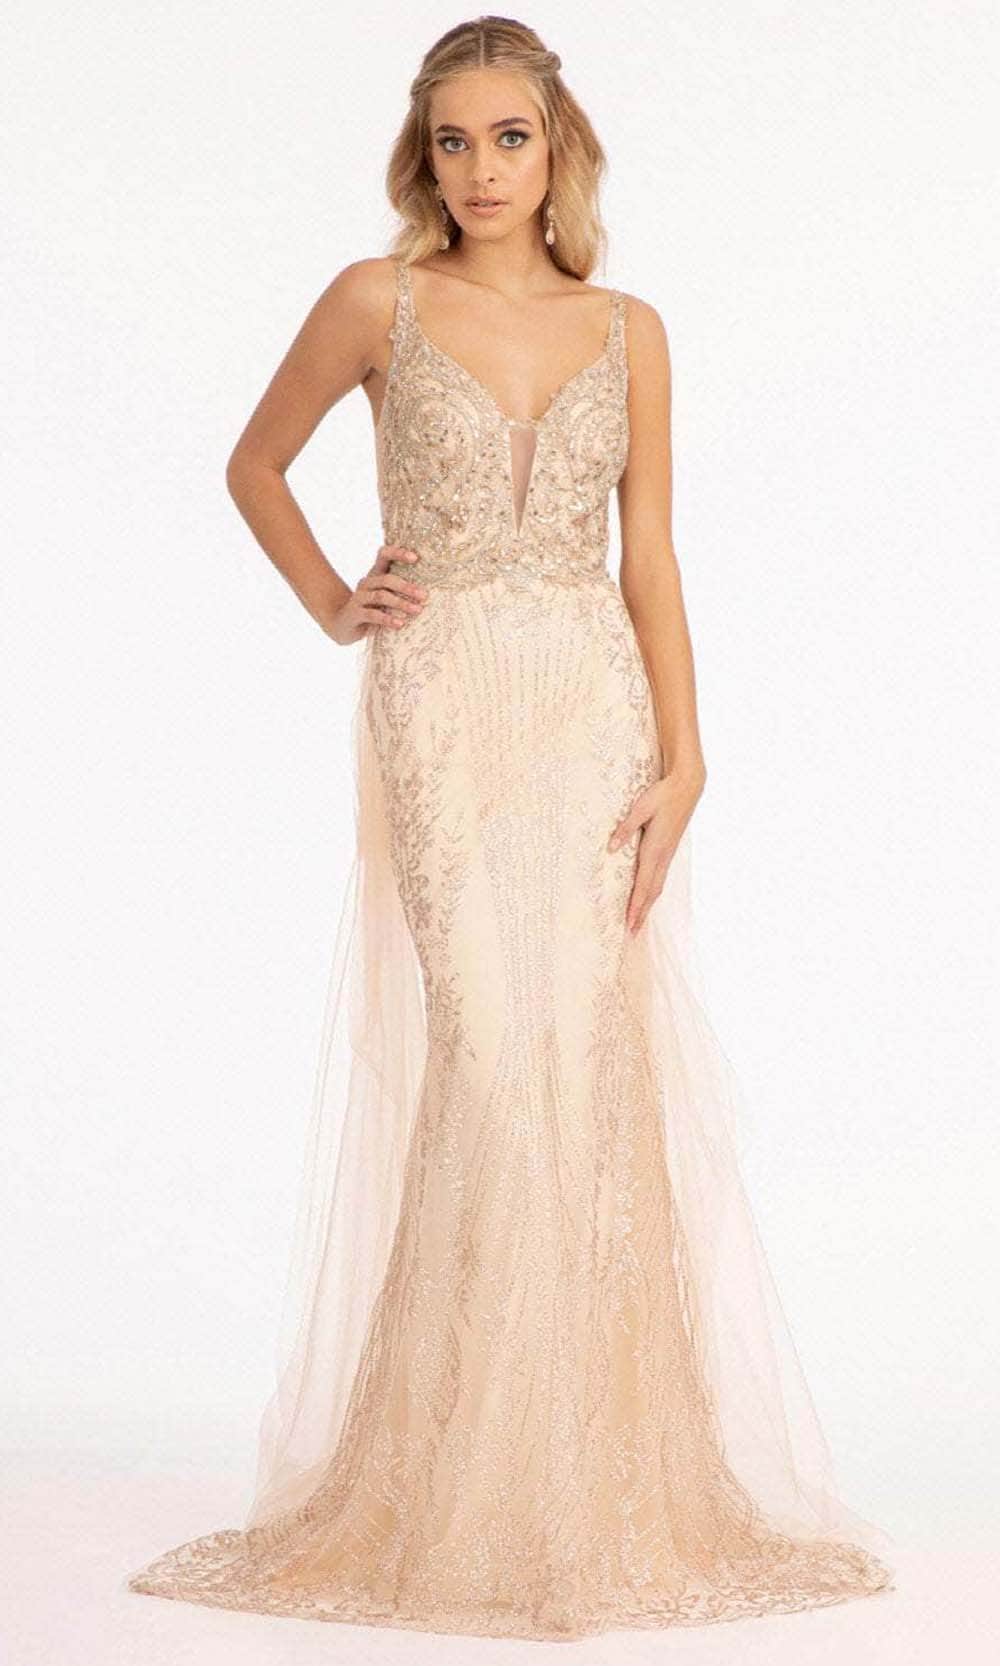 Elizabeth K GL3069 - Sleeveless Embellished Evening Gown Special Occasion Dress XS / Champagne